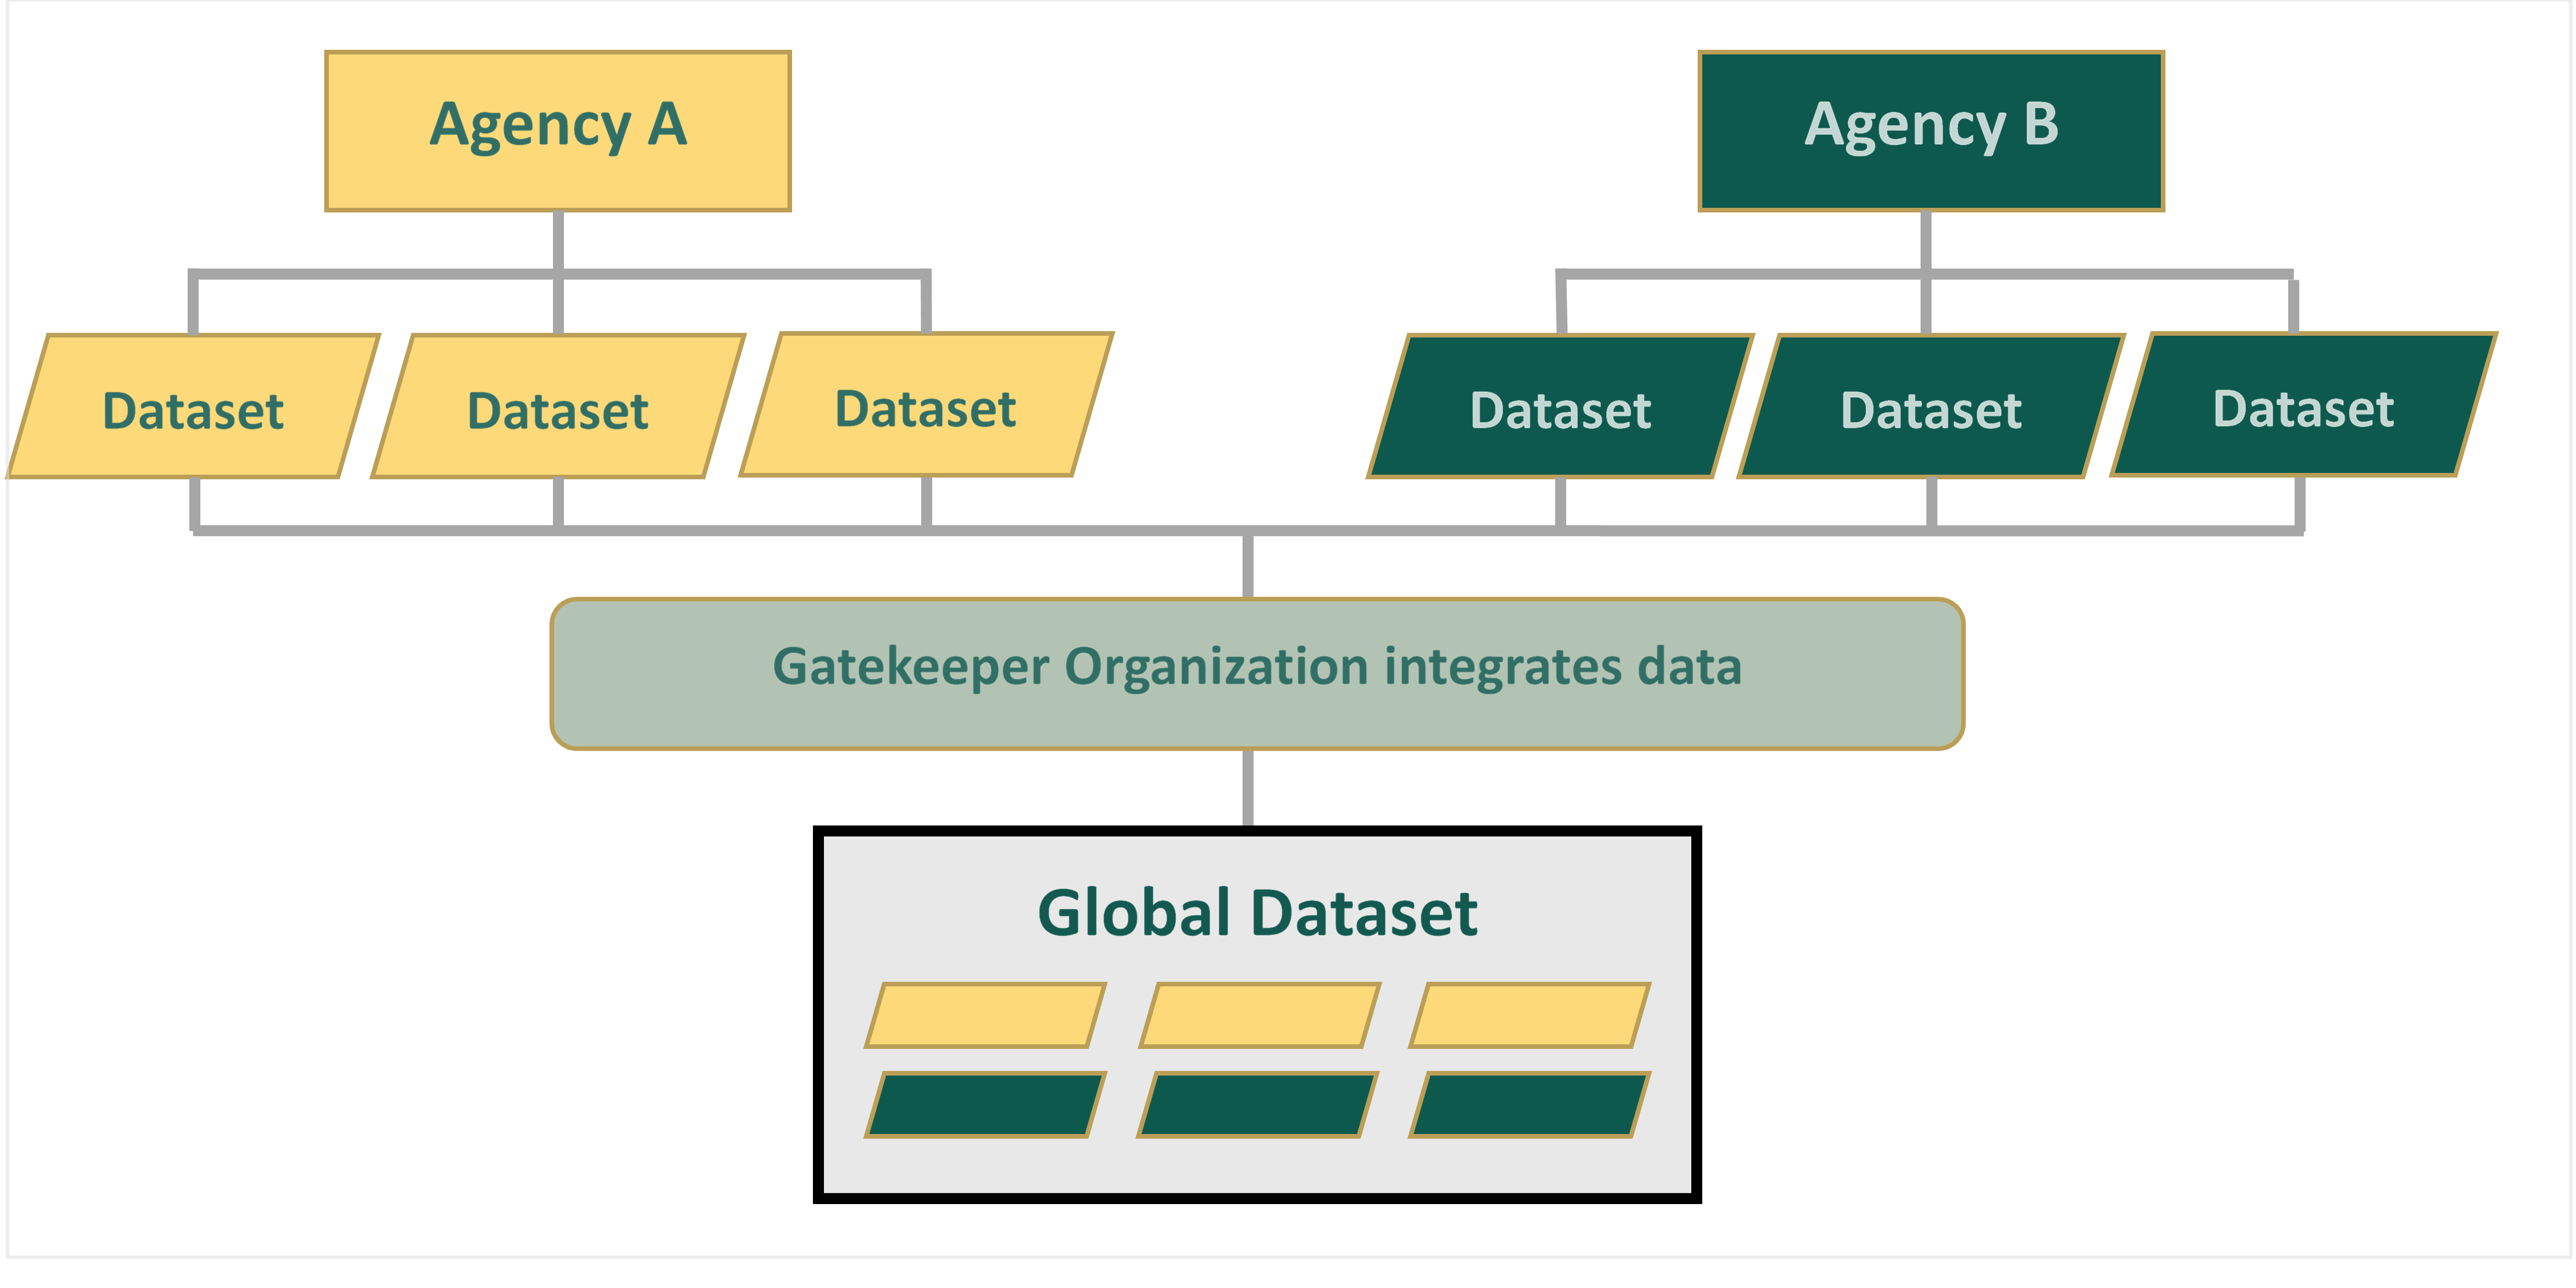 Graphic of Data Integration Toolkit Framework, showing two agencies funneling datasets into one global data set, with a gate keeper organization integrating the datasets into one dataset. Please contact cbhj@wayne.edu with questions.